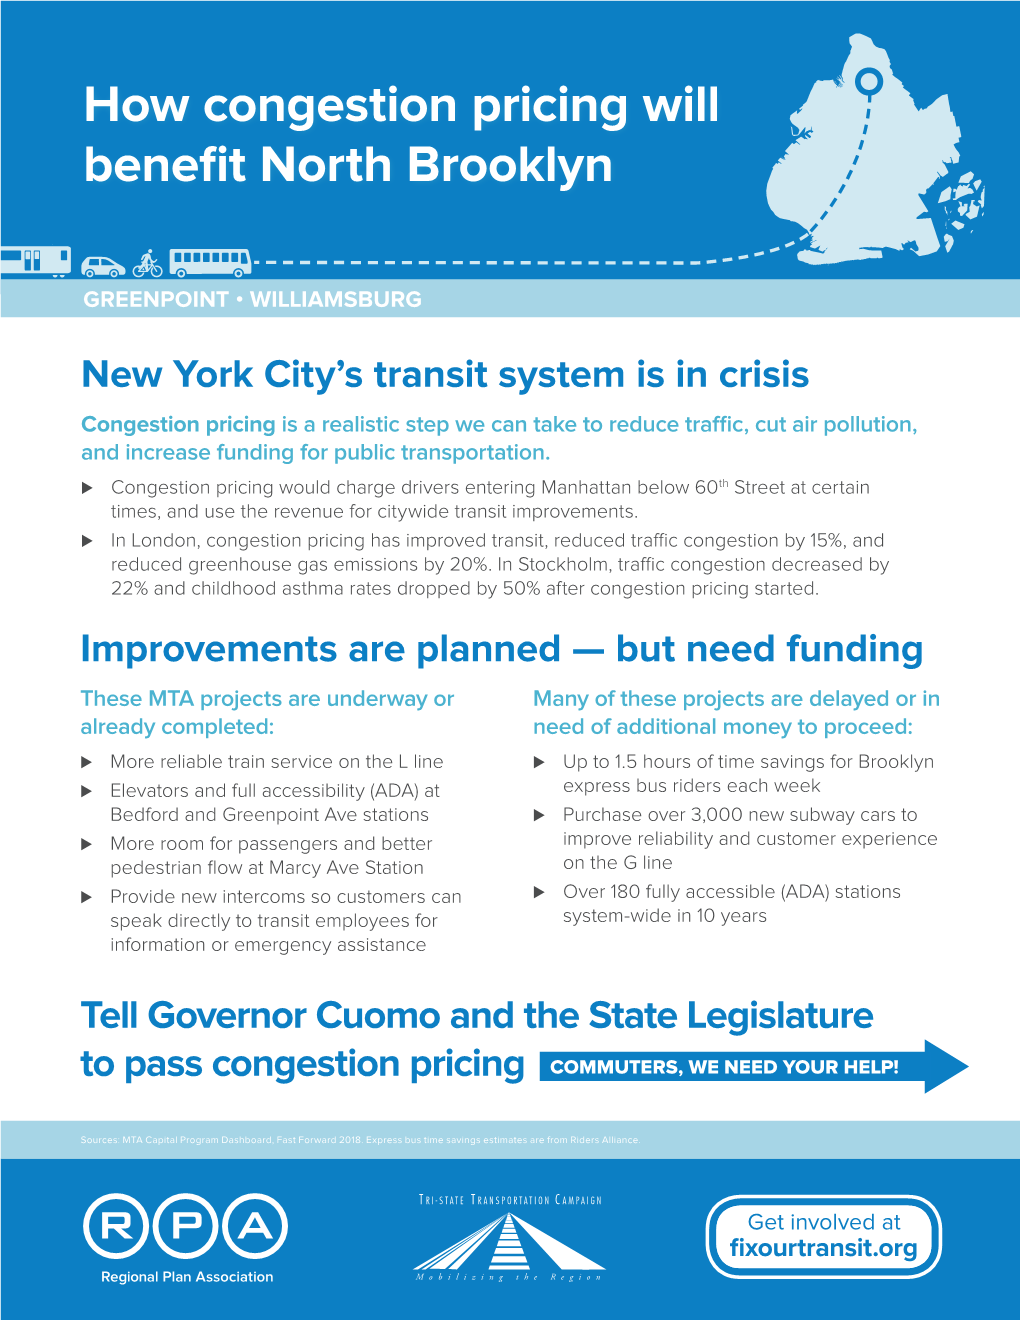 How Congestion Pricing Will Benefit North Brooklyn